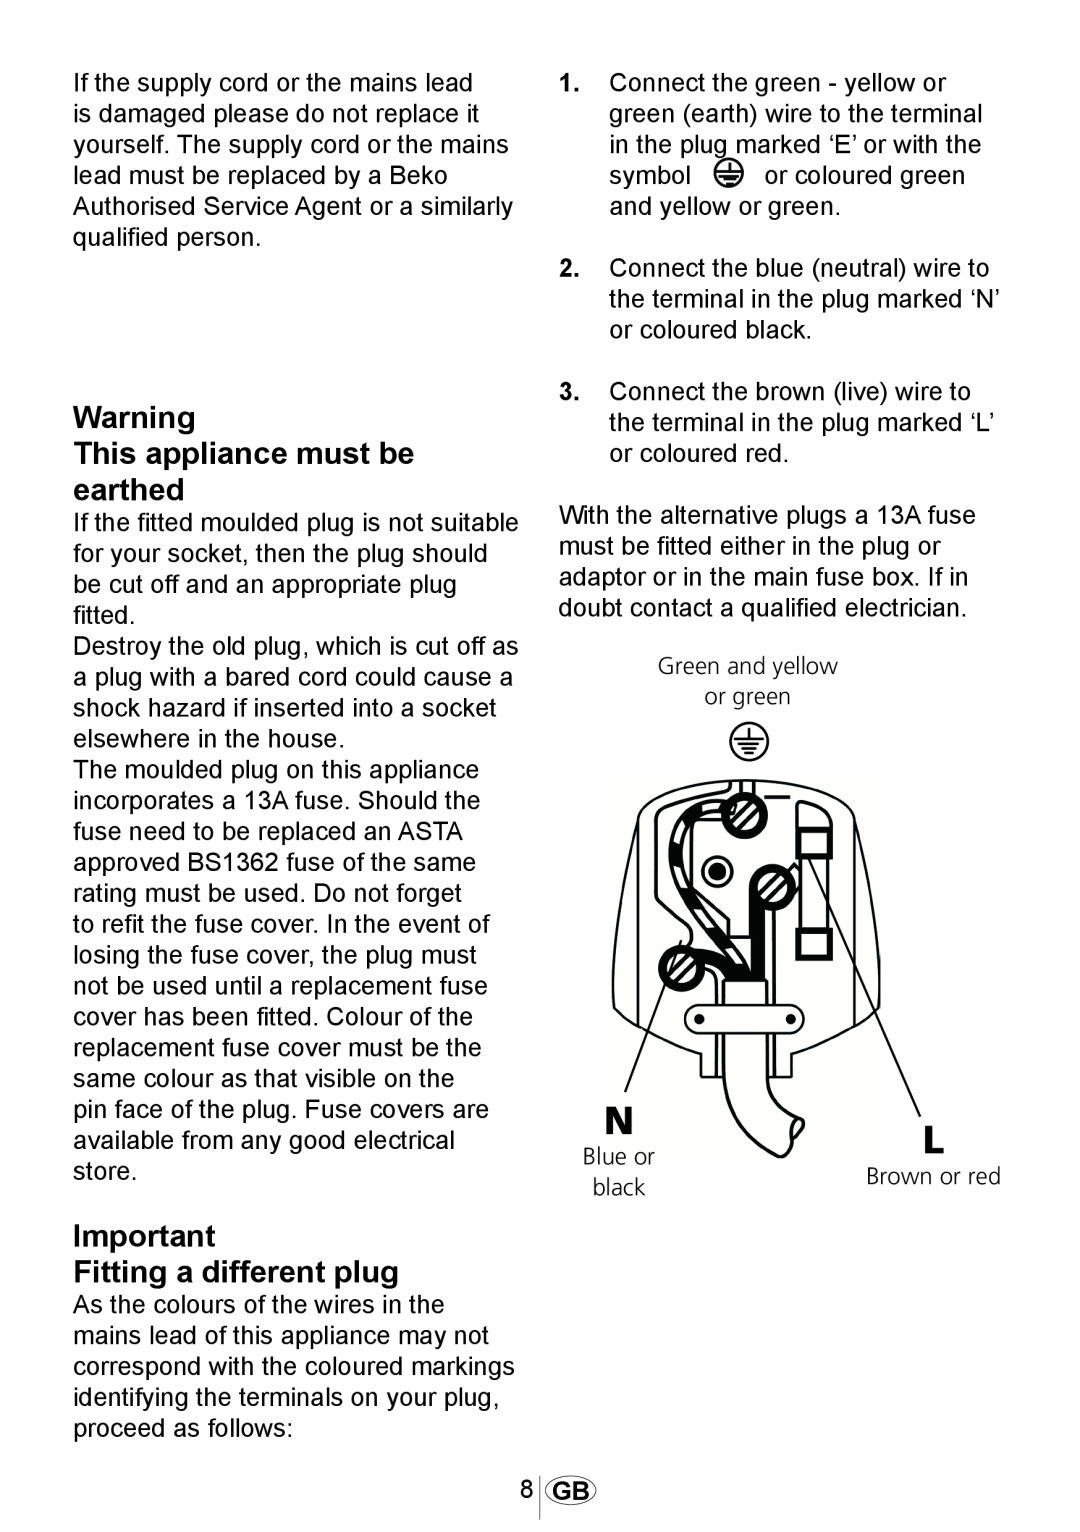 Beko DSFN 1532 manual This appliance must be earthed, Fitting a different plug 